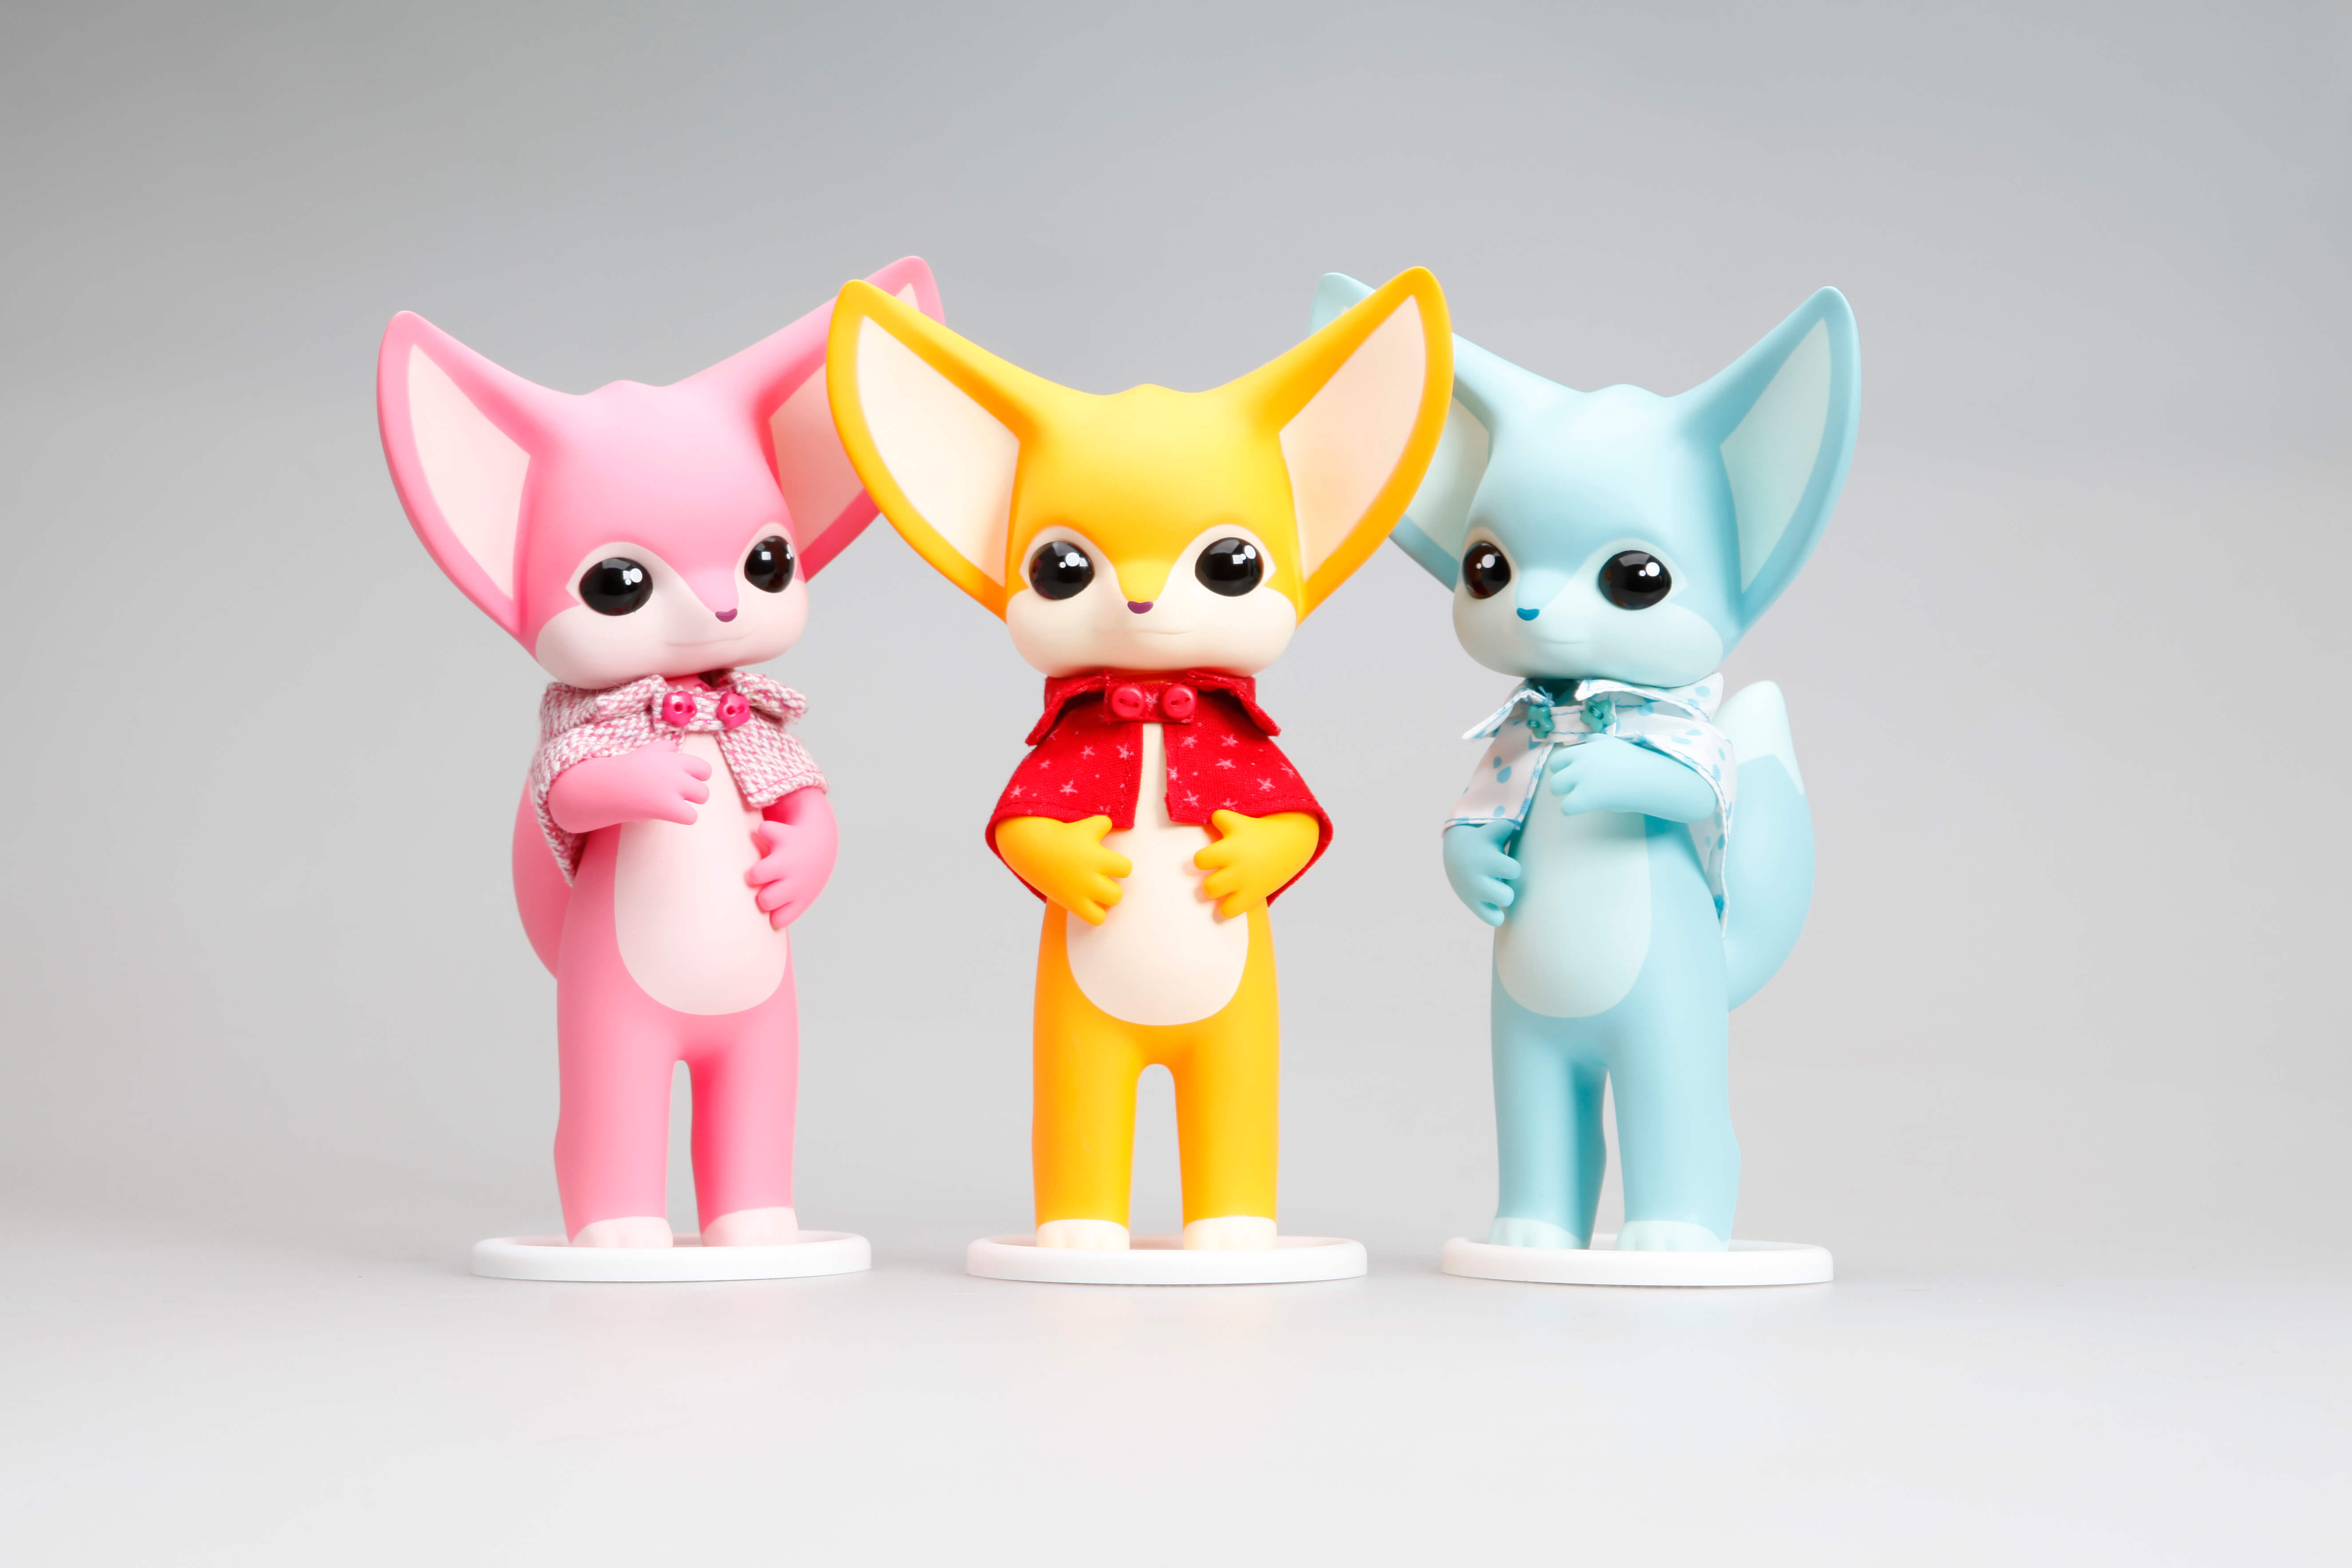 Toy vinyl figurine of Fennec Fox Dona by twelveDot surrounded by animal figures and cartoon characters.